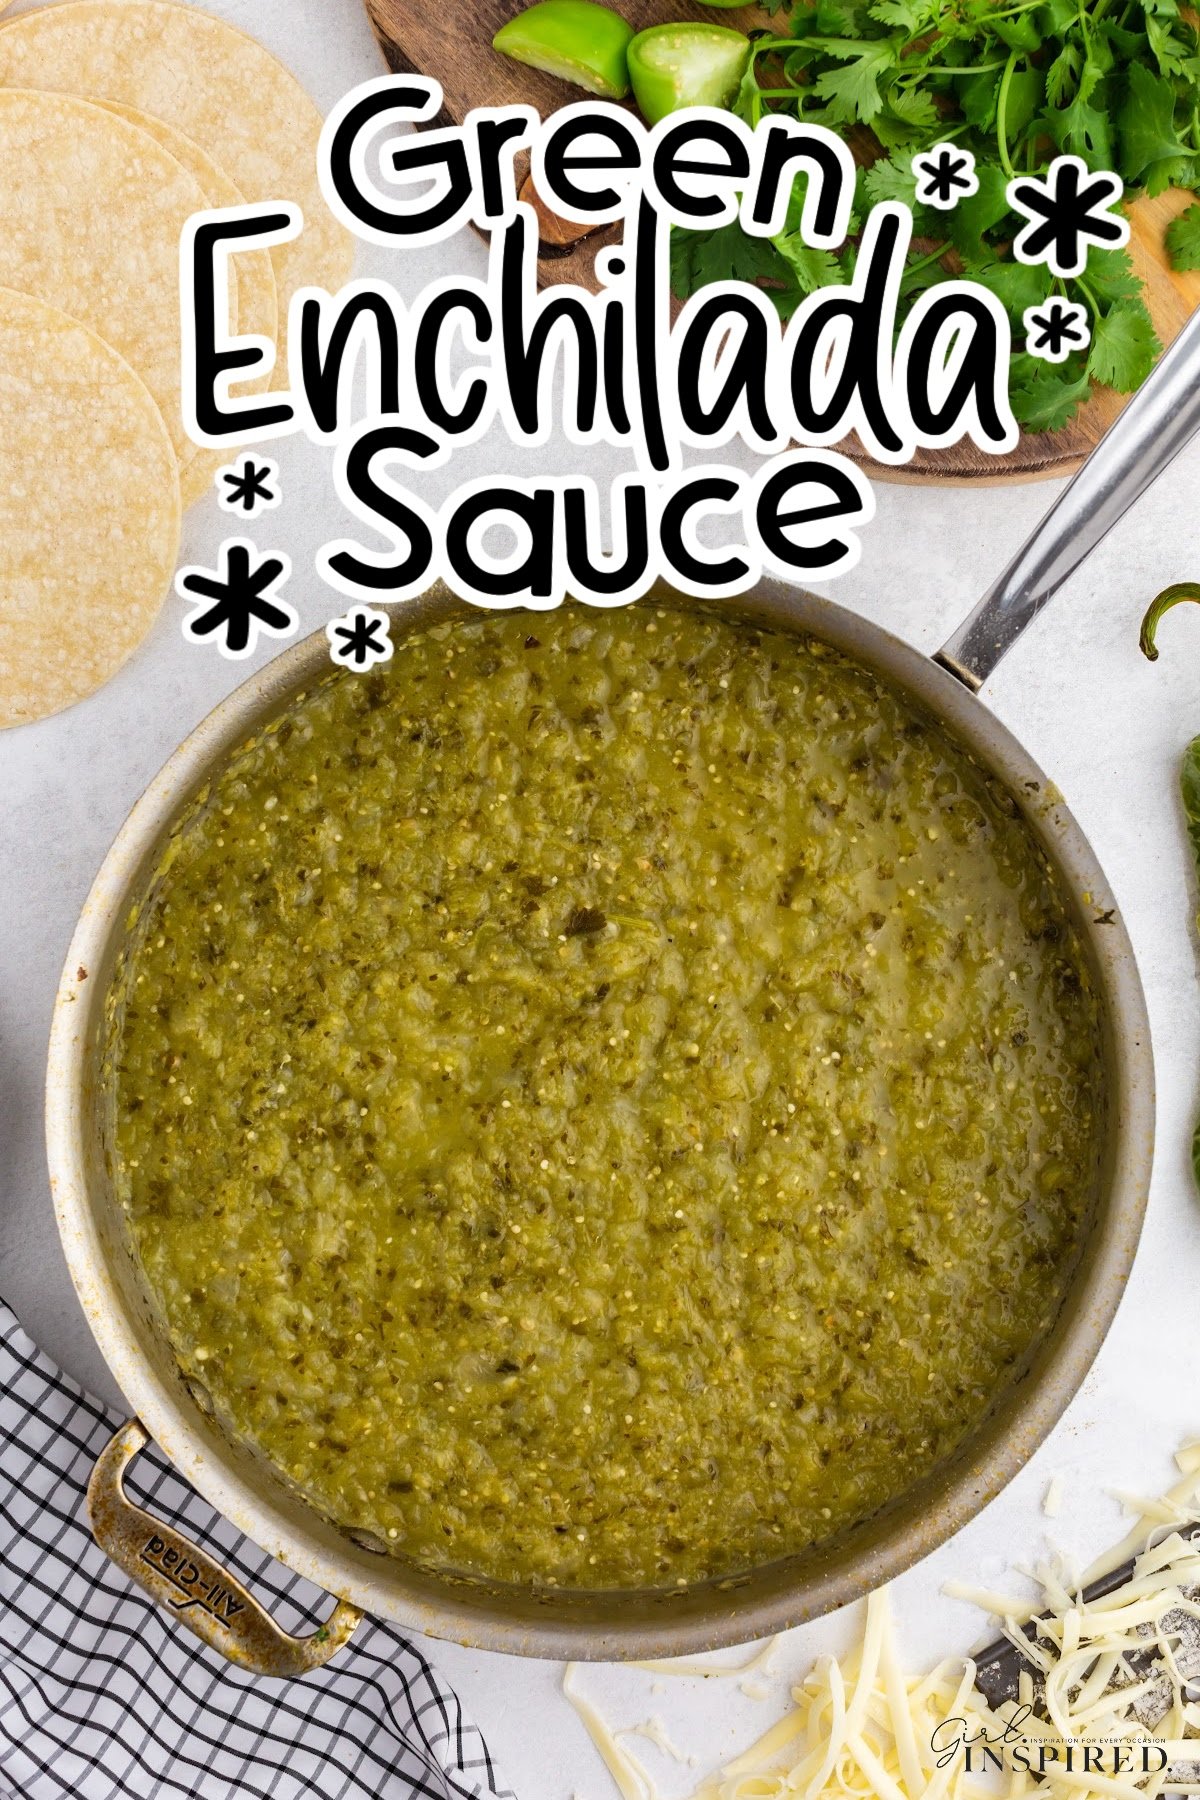 A sauce pan of Green Enchilada Sauce with text overlay.